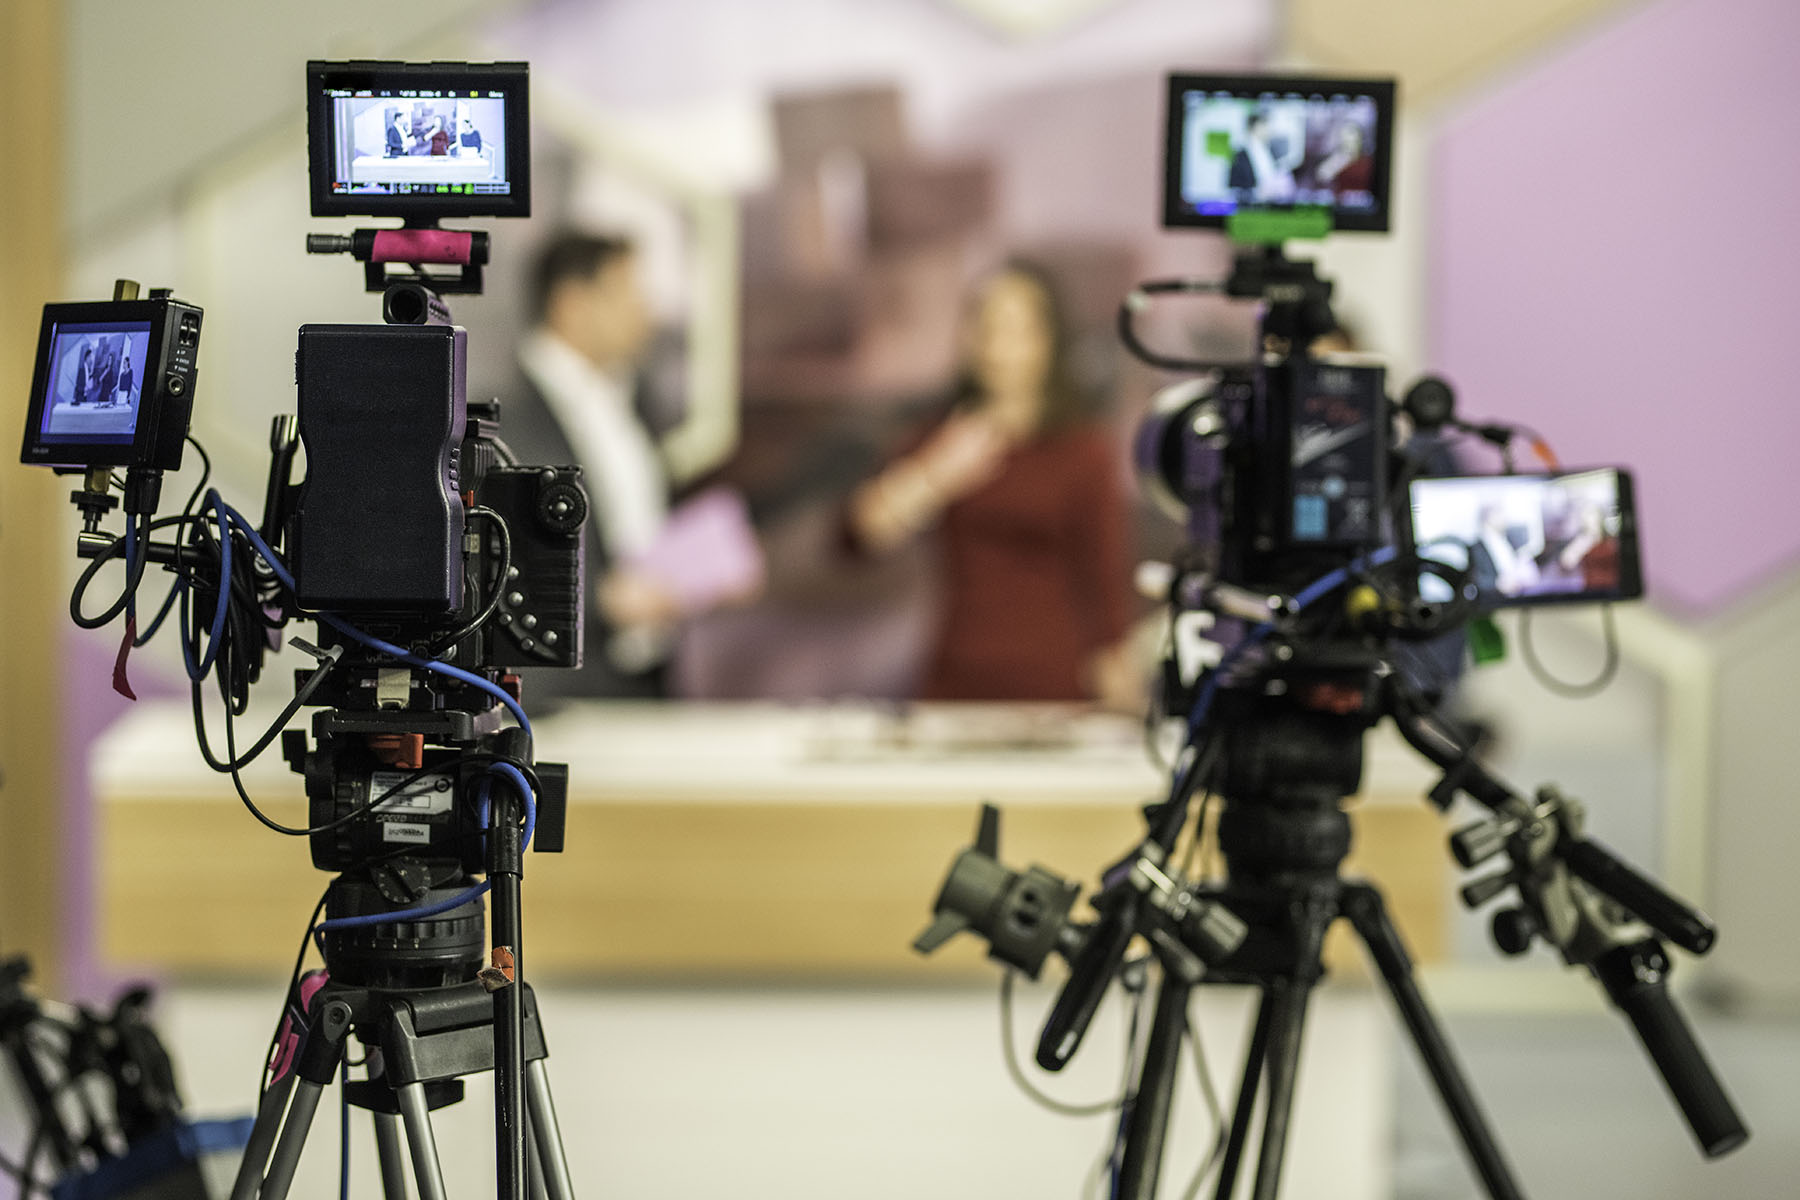 Rear view of two cameras filming an infomercial TV-show.